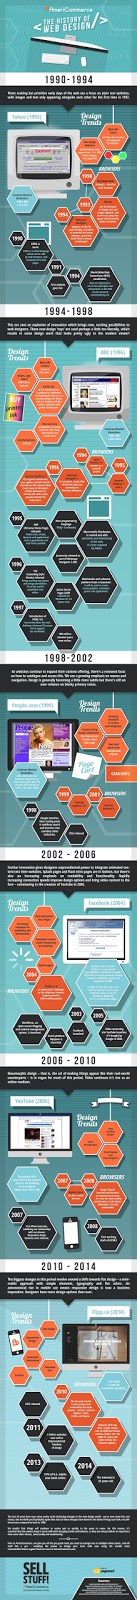 Infographic- The History Of Web Design!